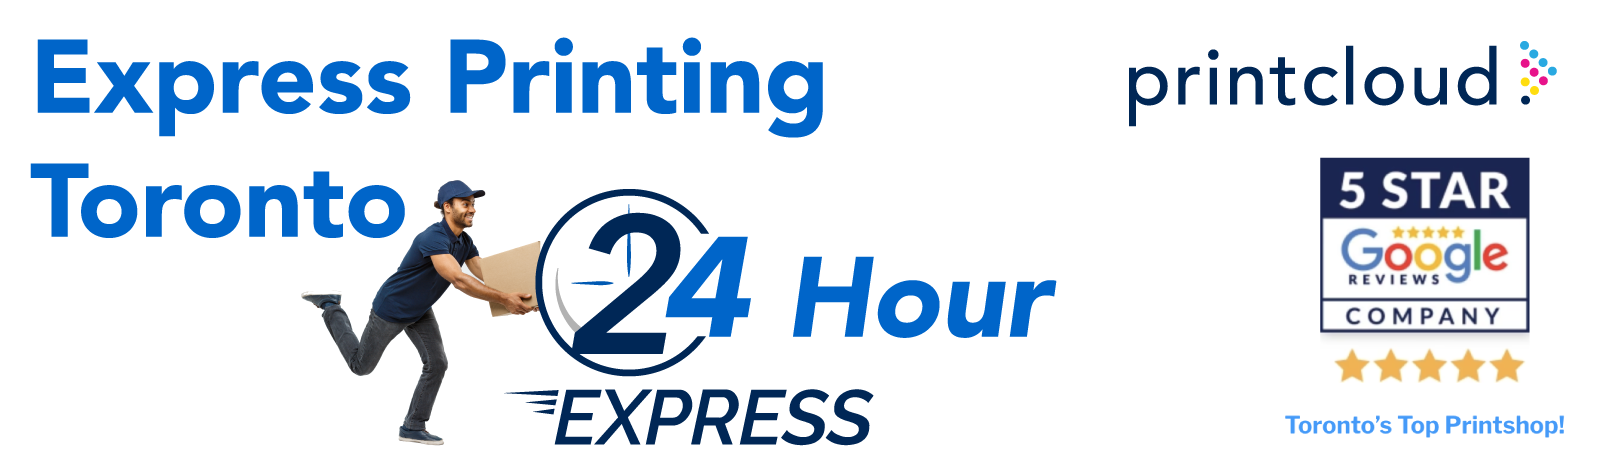 Printcloud.ca: Your One-Stop Shop for Express Printing Services in the Greater Toronto Area